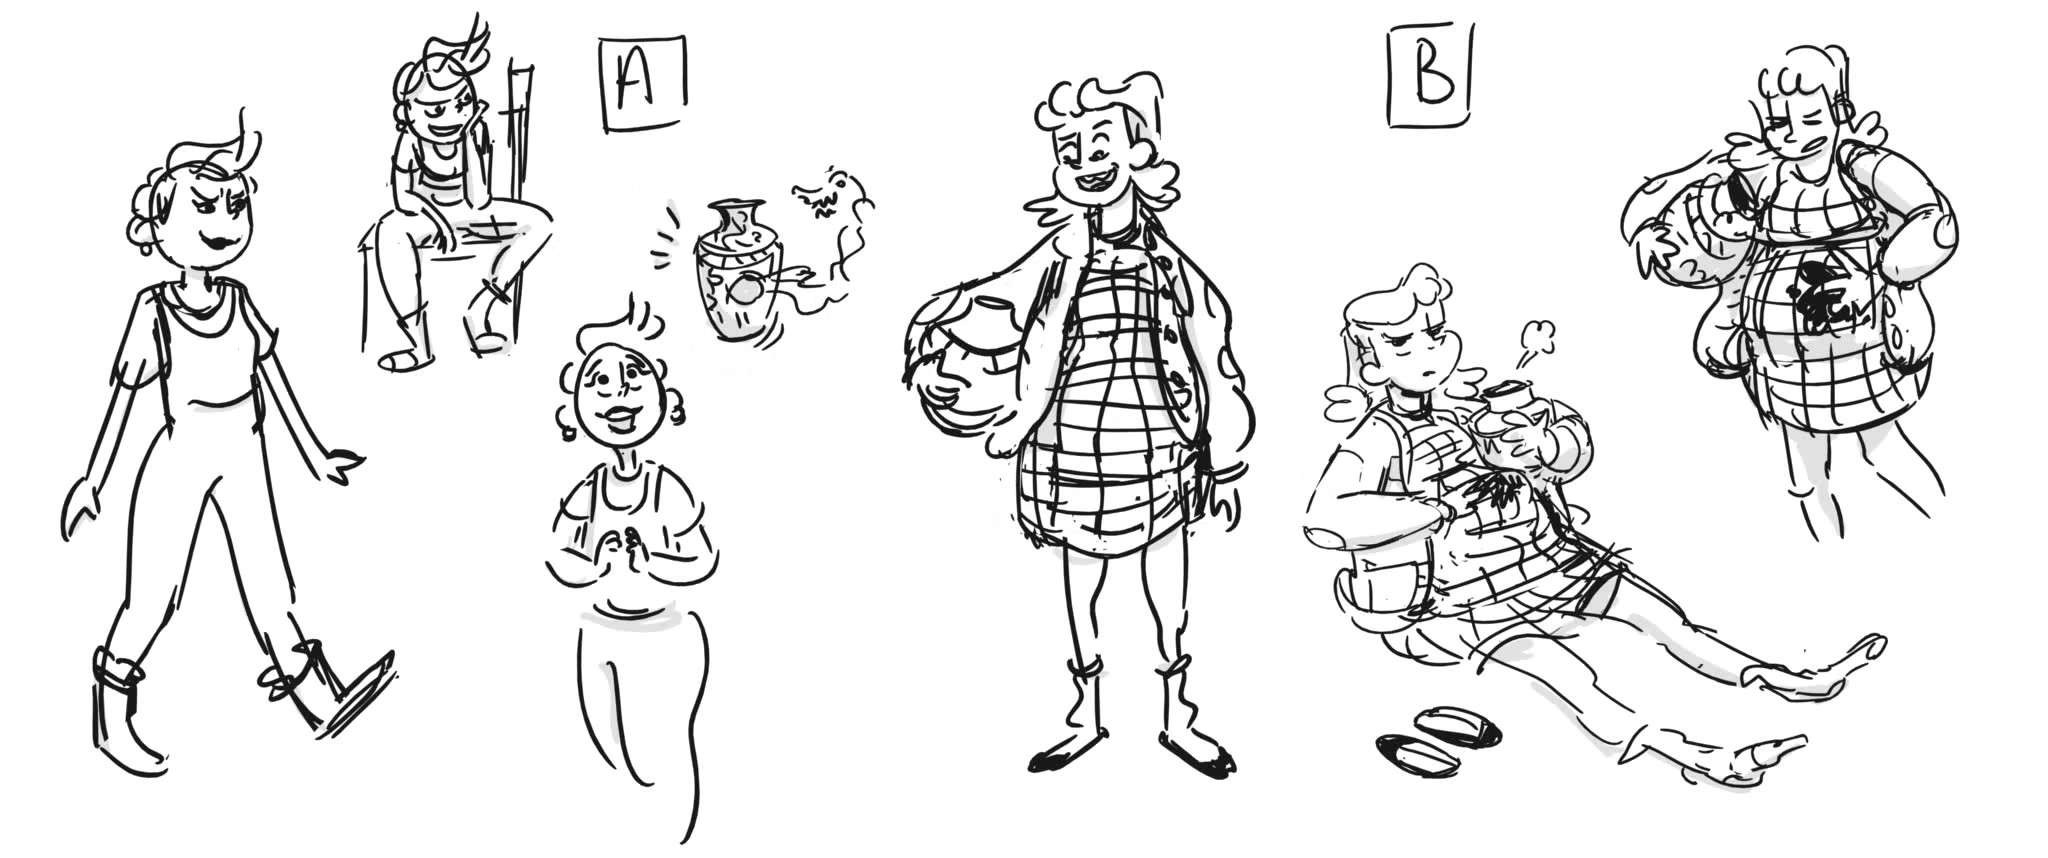 Characters from the antique storyboards.